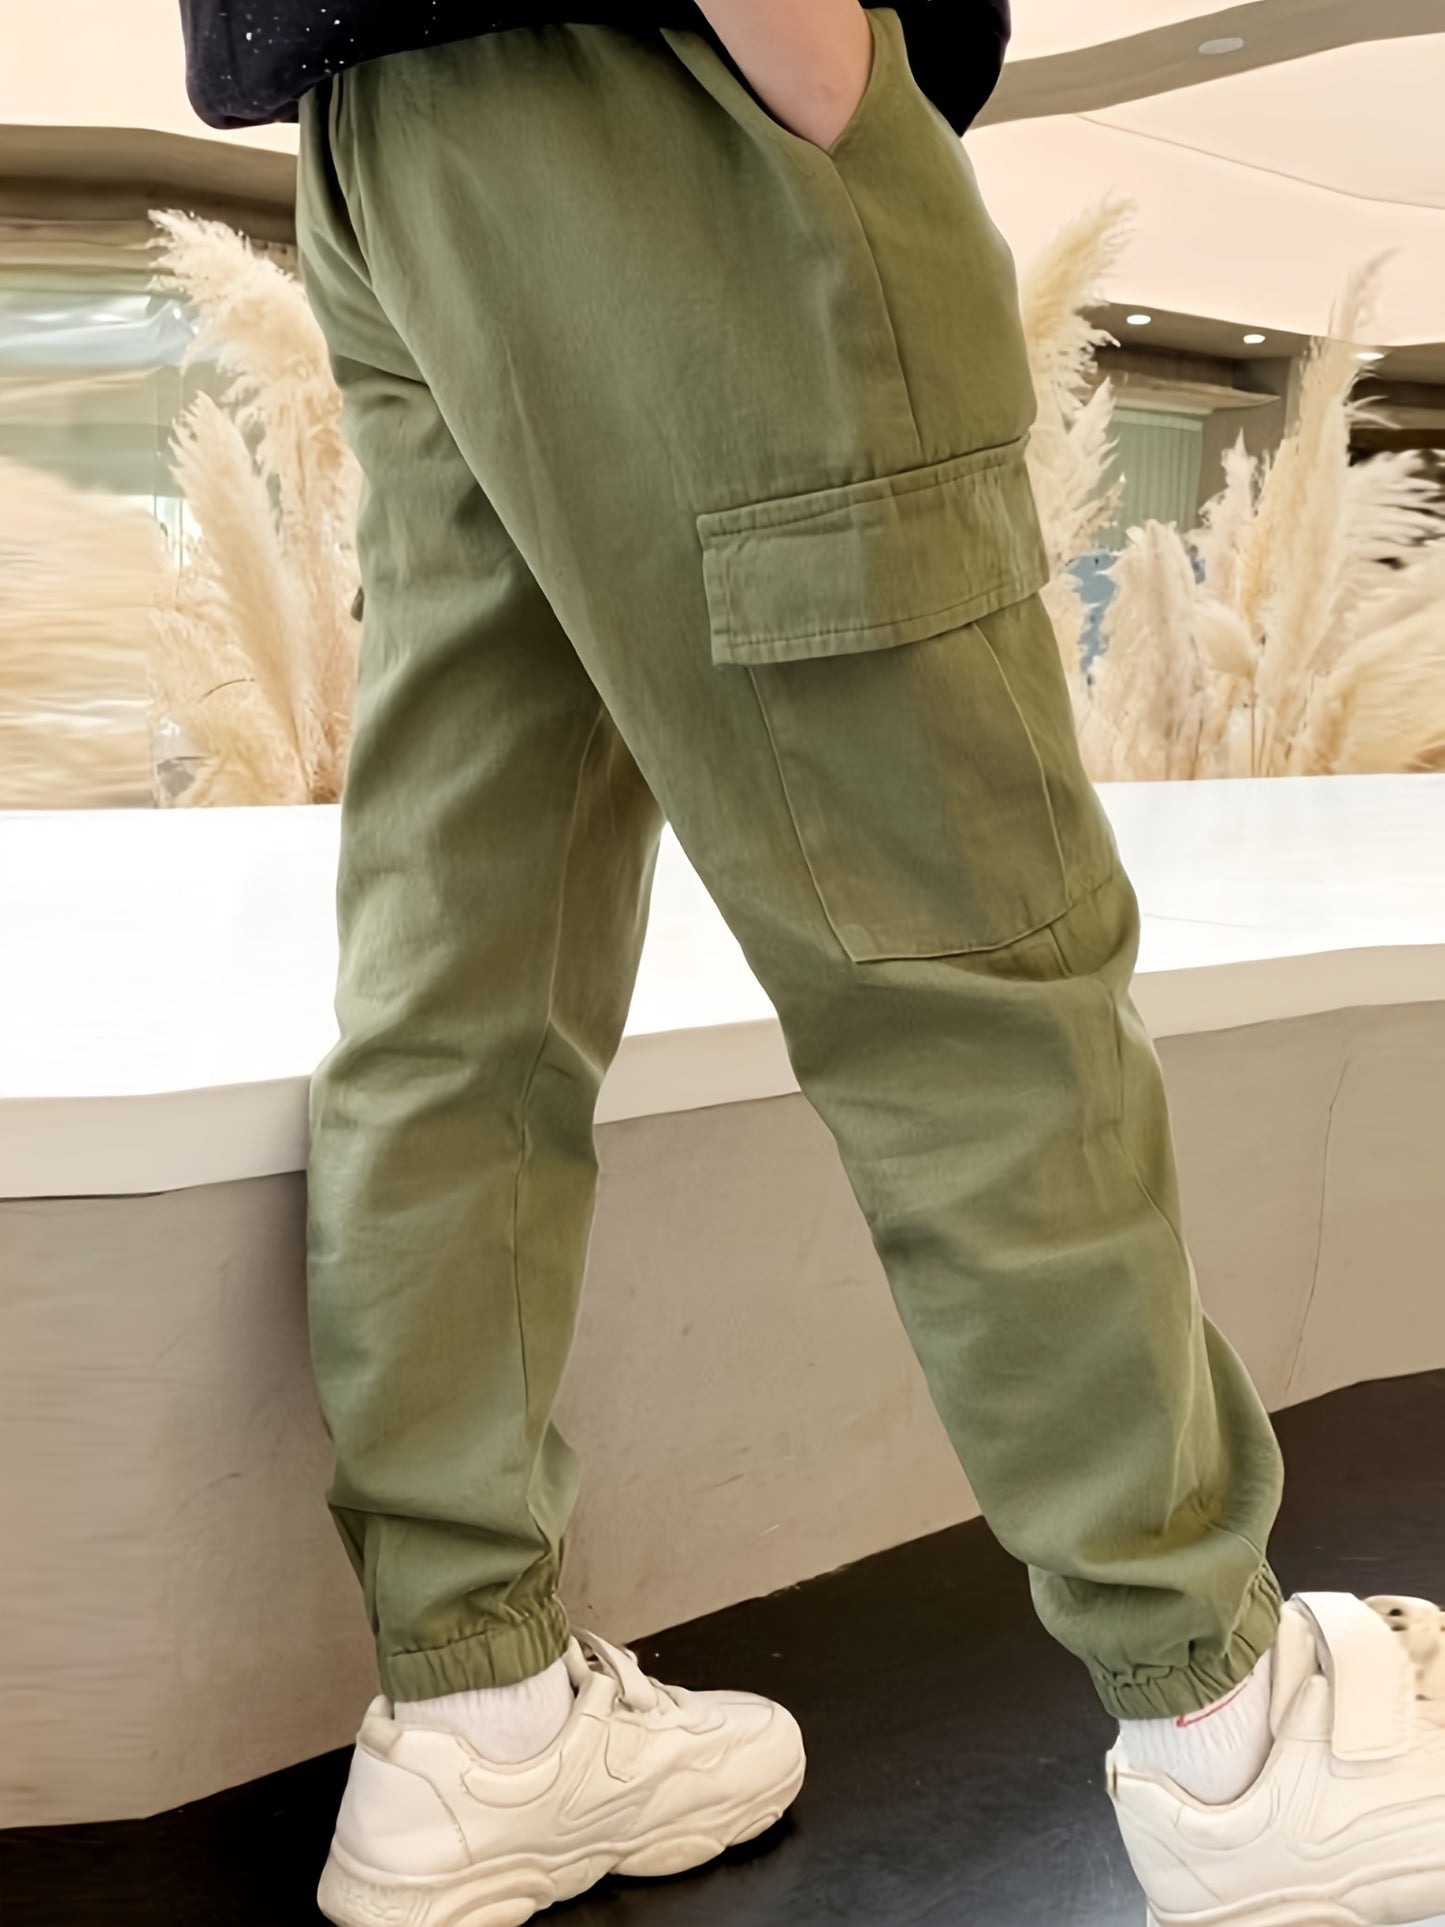 Kid's Cotton Cargo Pants, Elastic Waist Trousers With Pockets, Boy's Clothes For Spring Fall Winter